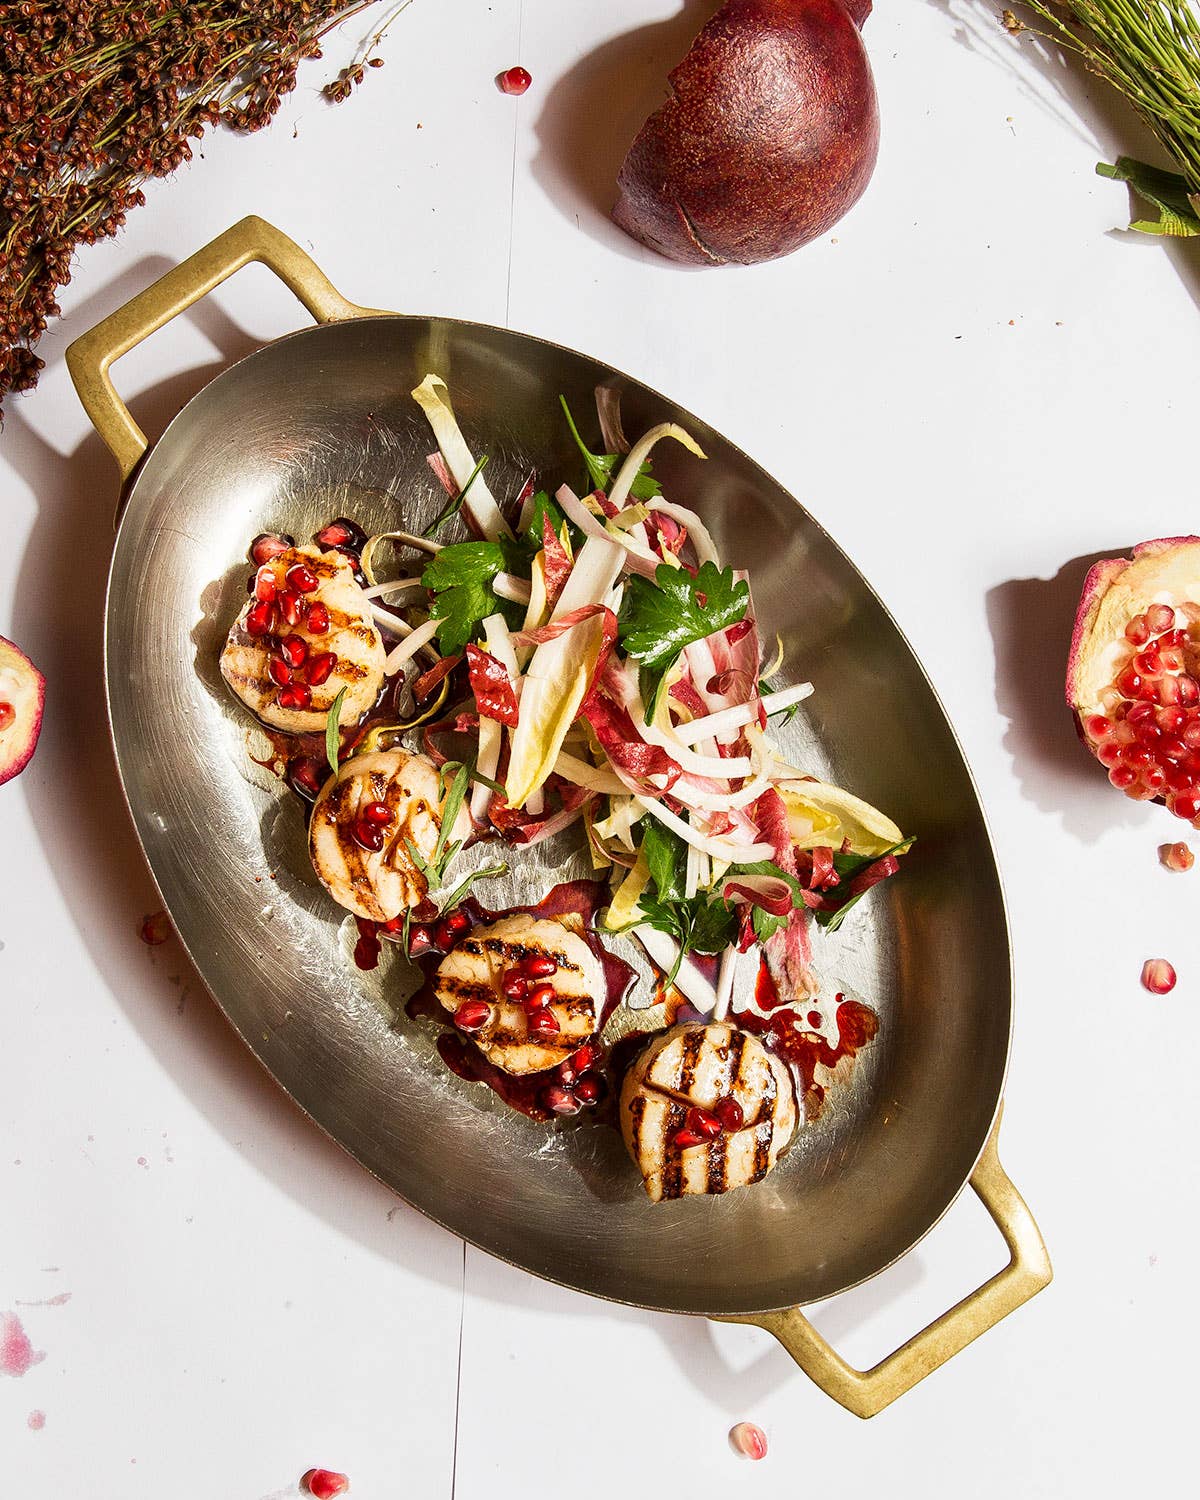 Grilled Scallops with Pomegranate Brown Butter and Toasted Hazelnuts